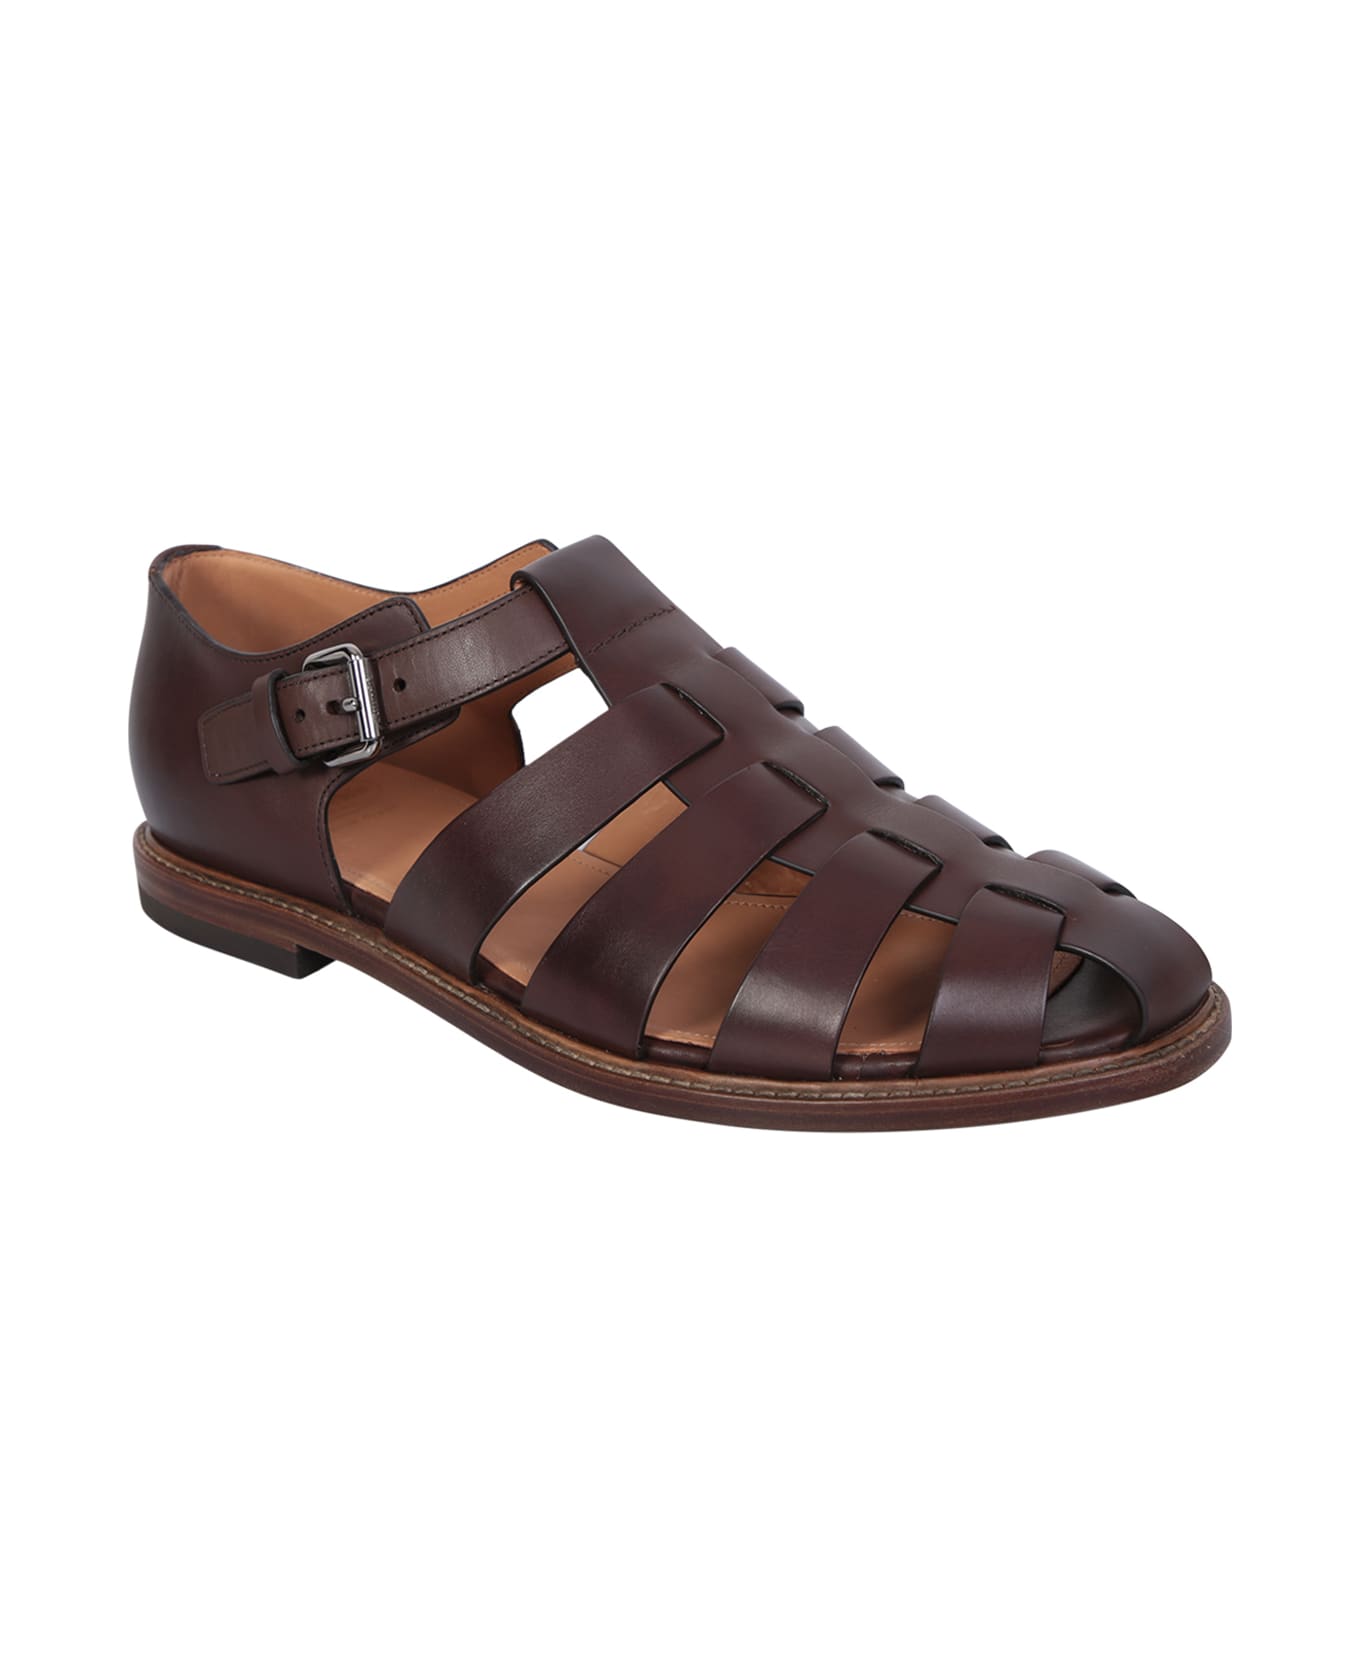 Church's Brown Fisherman Sandals - Brown その他各種シューズ